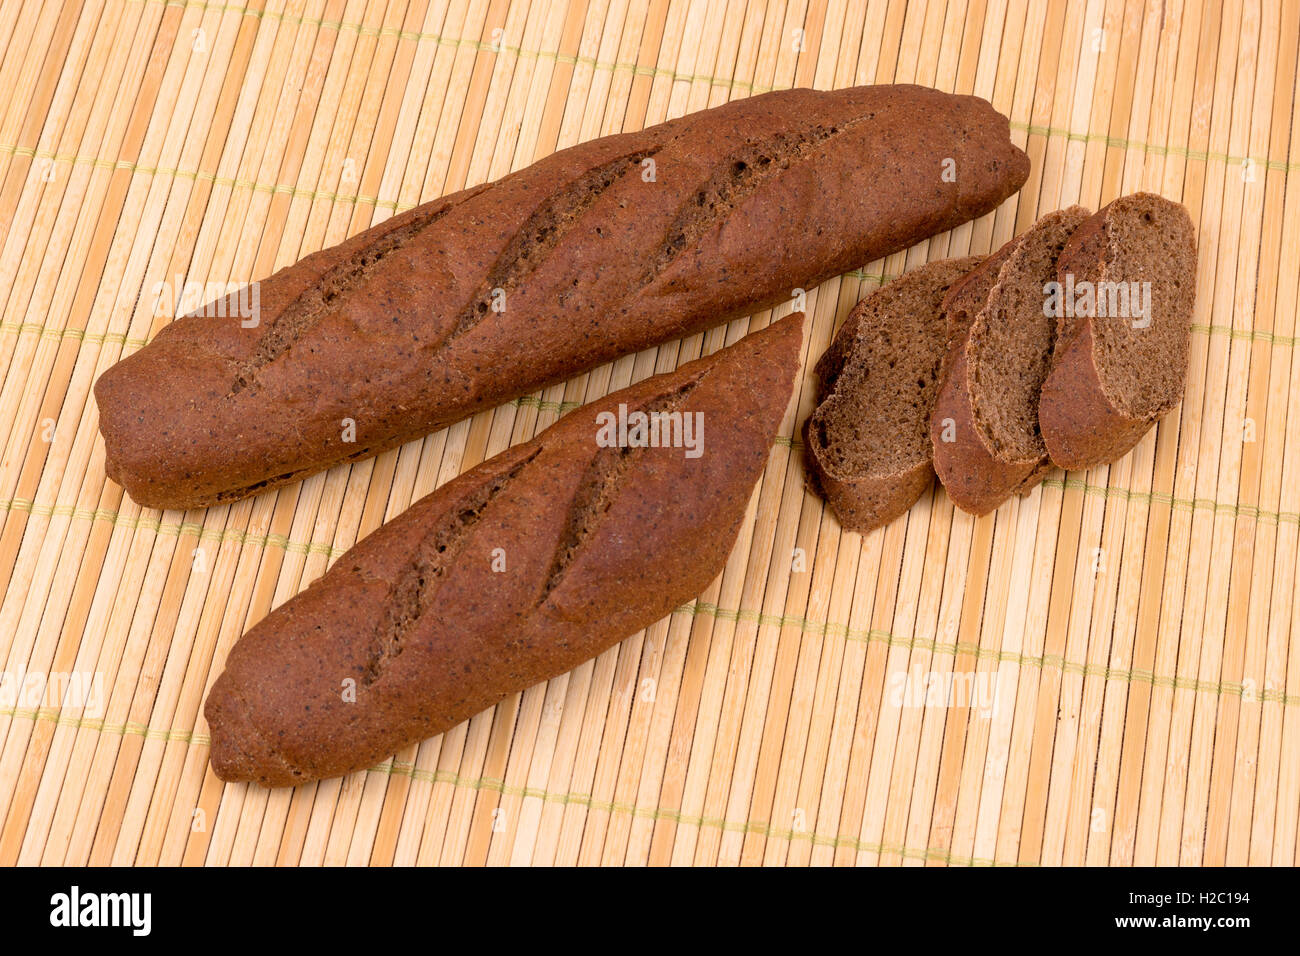 bread from durum wheat on wicker mat of bamboo Stock Photo